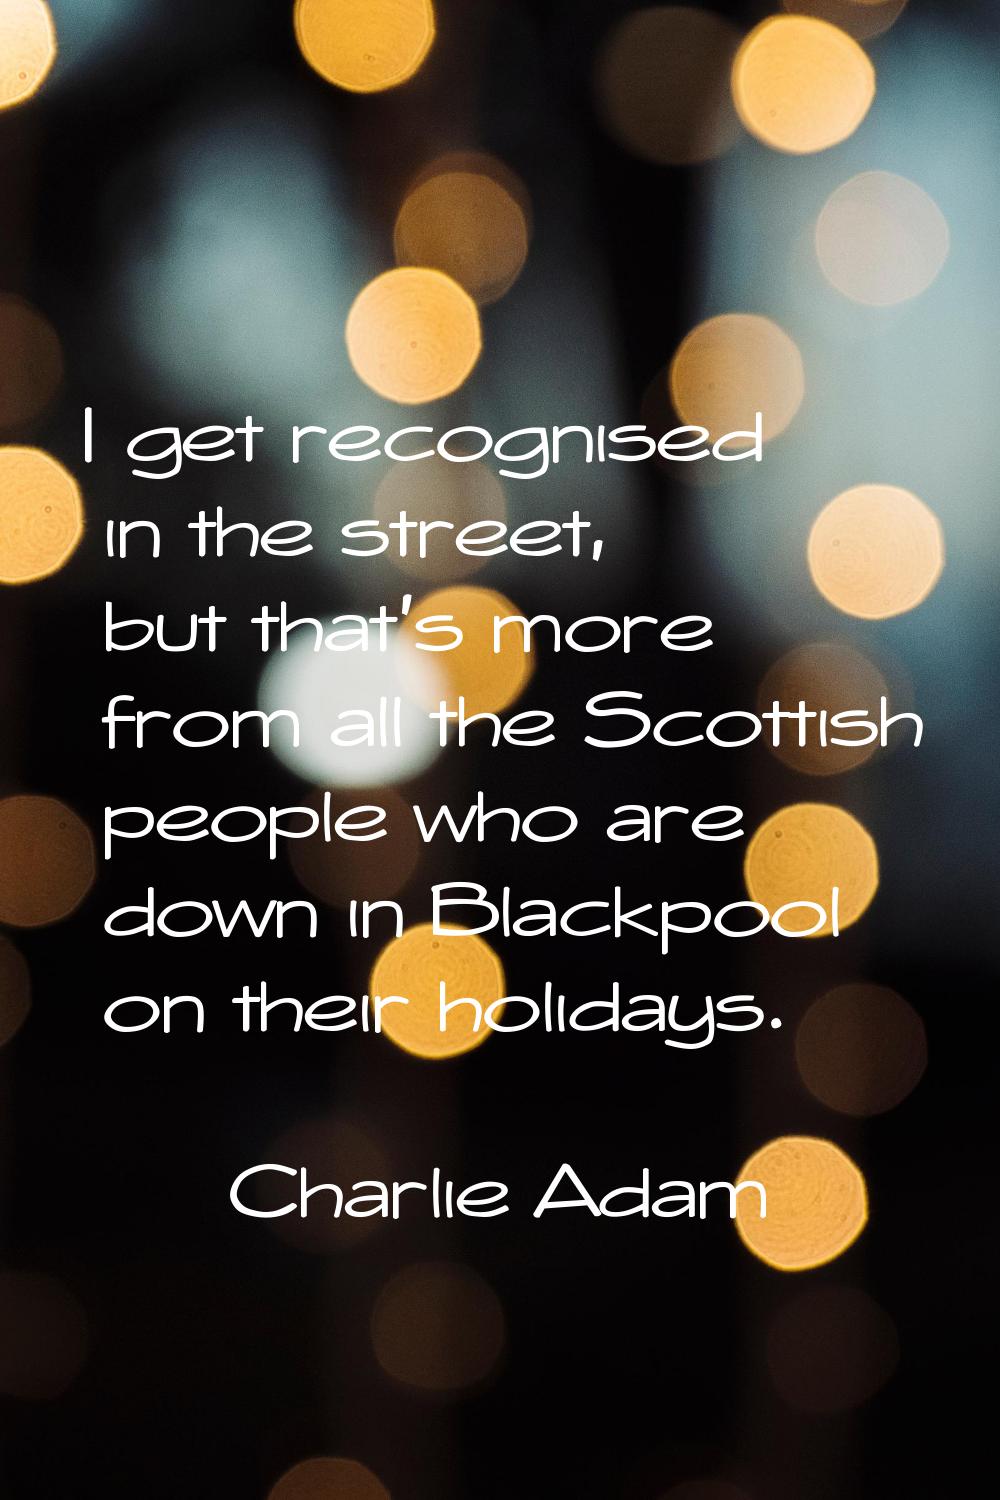 I get recognised in the street, but that's more from all the Scottish people who are down in Blackp